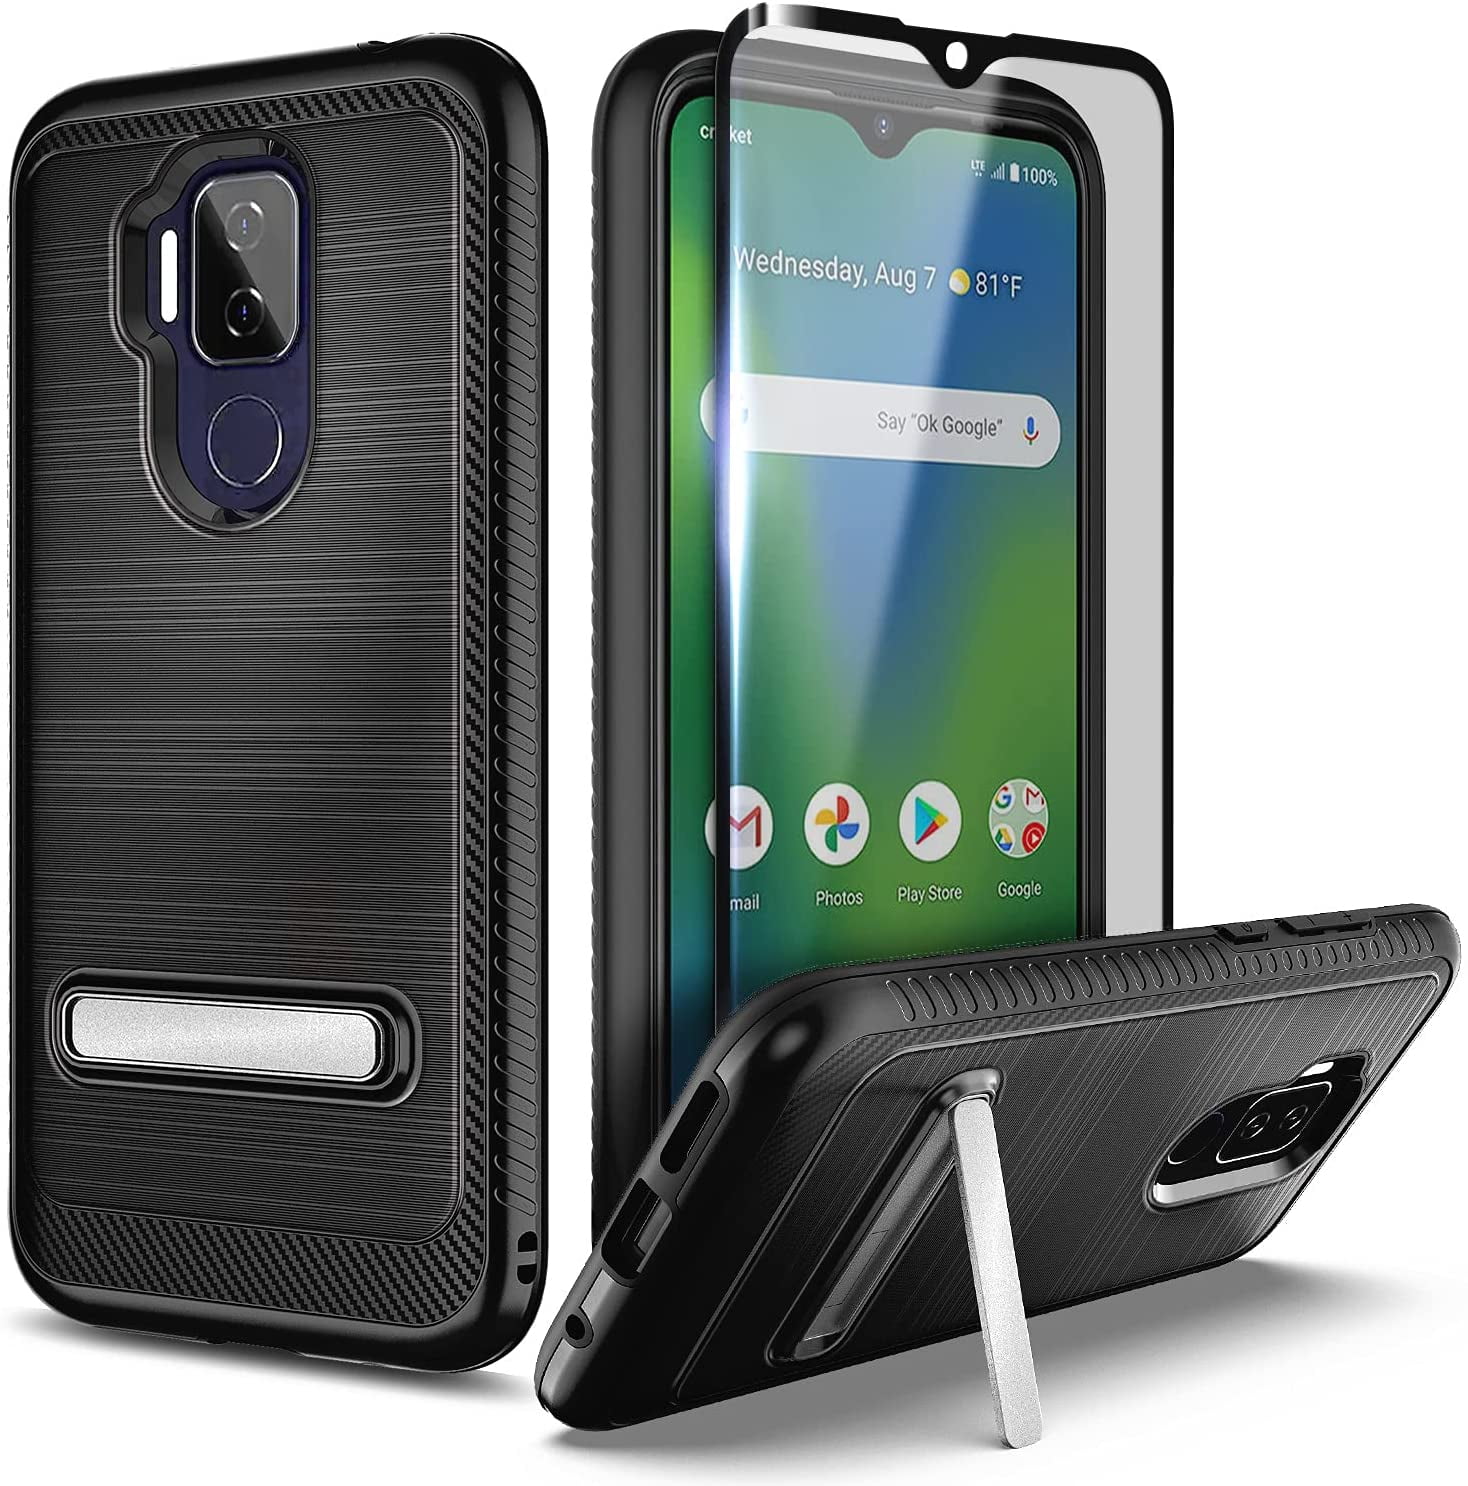 Shockproof with Full Edged Tempered Glass Screen Protector Non-Slip Brushed Black Samsung Galaxy A6 Case Durable Armor Defender Accessory Hybrid Premium Tough Dual Layer 